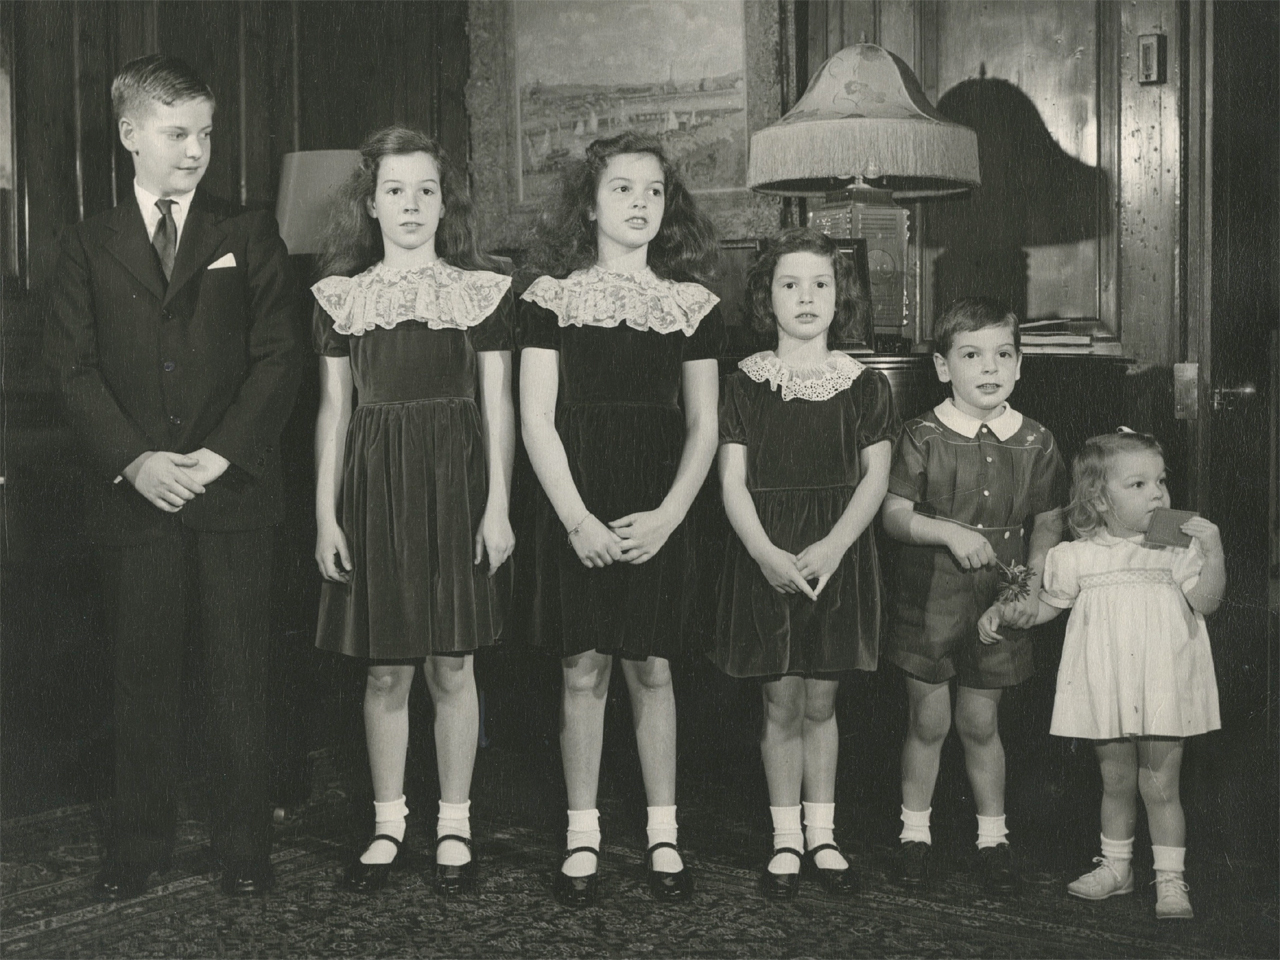 Rockefeller Archive Center - Happy Siblings Day! The children of